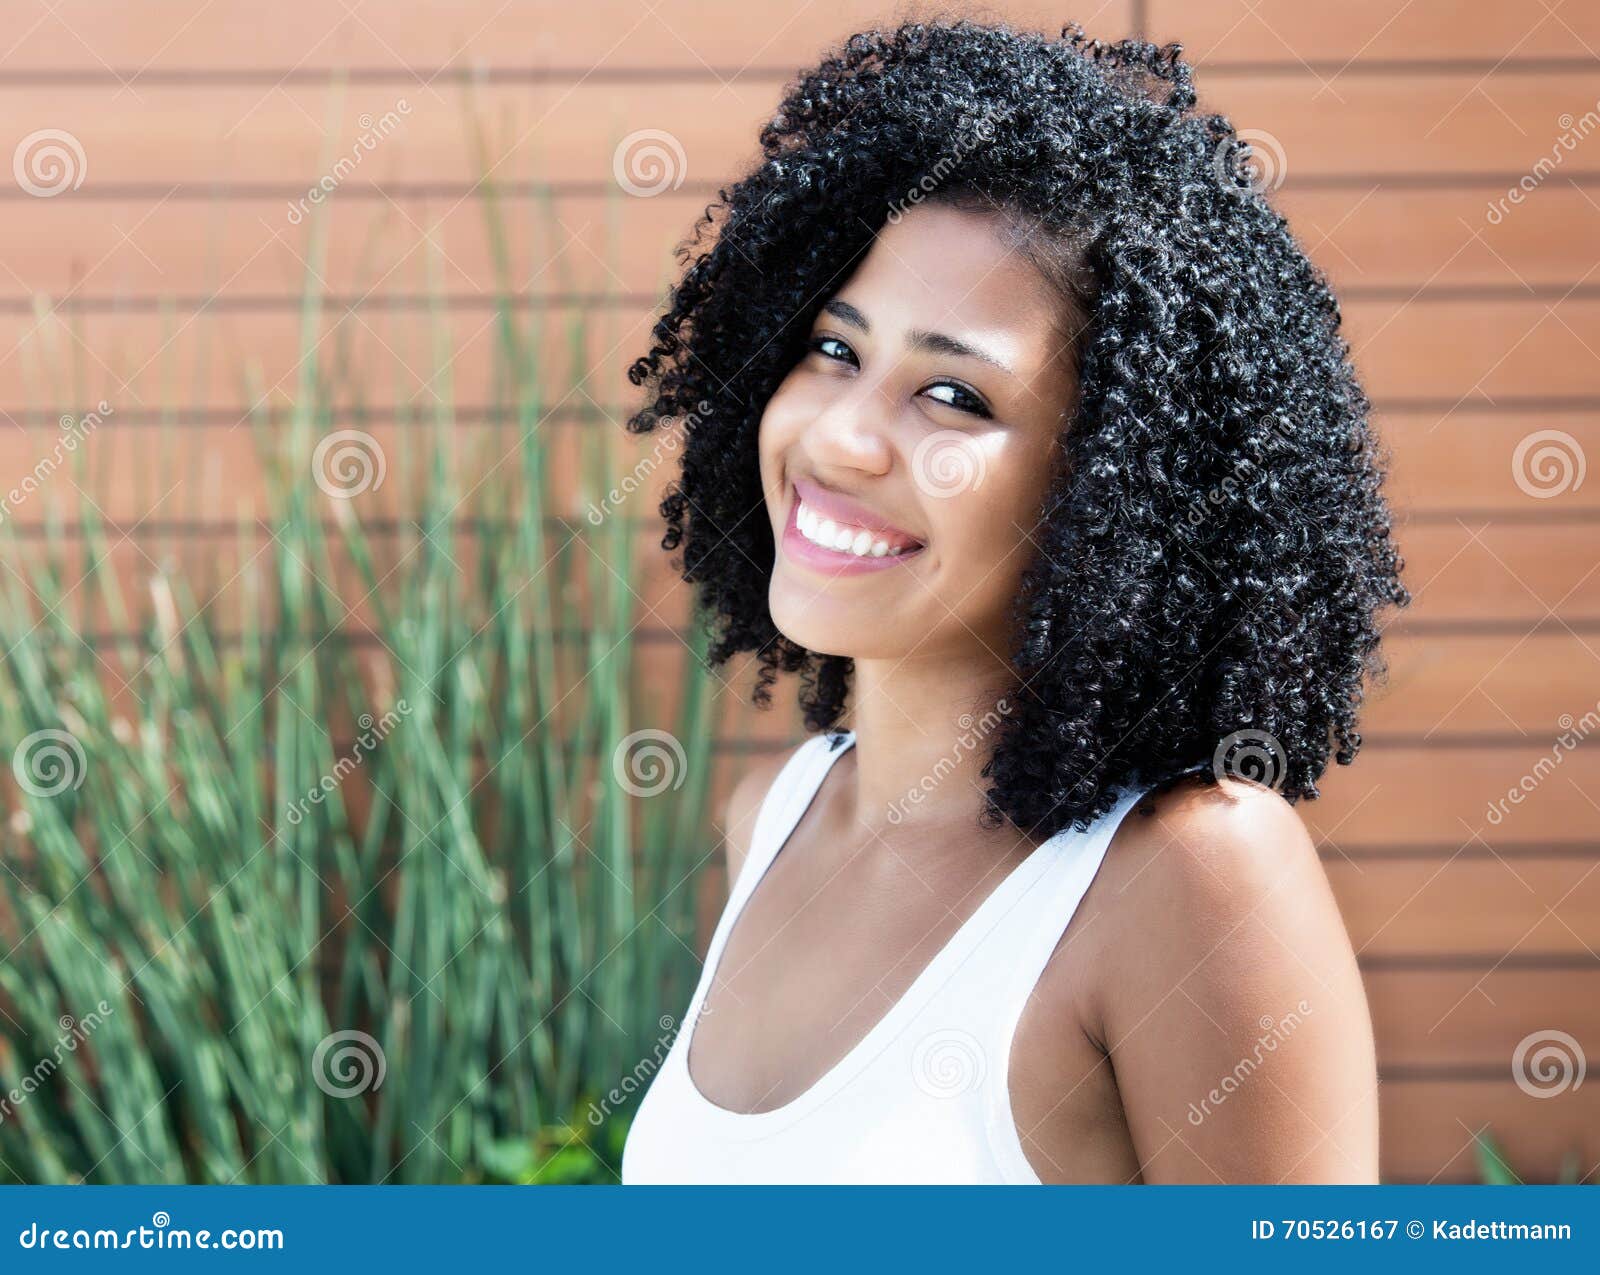 Beautiful Latin Woman With Curly Black Hair Stock Image Image Of